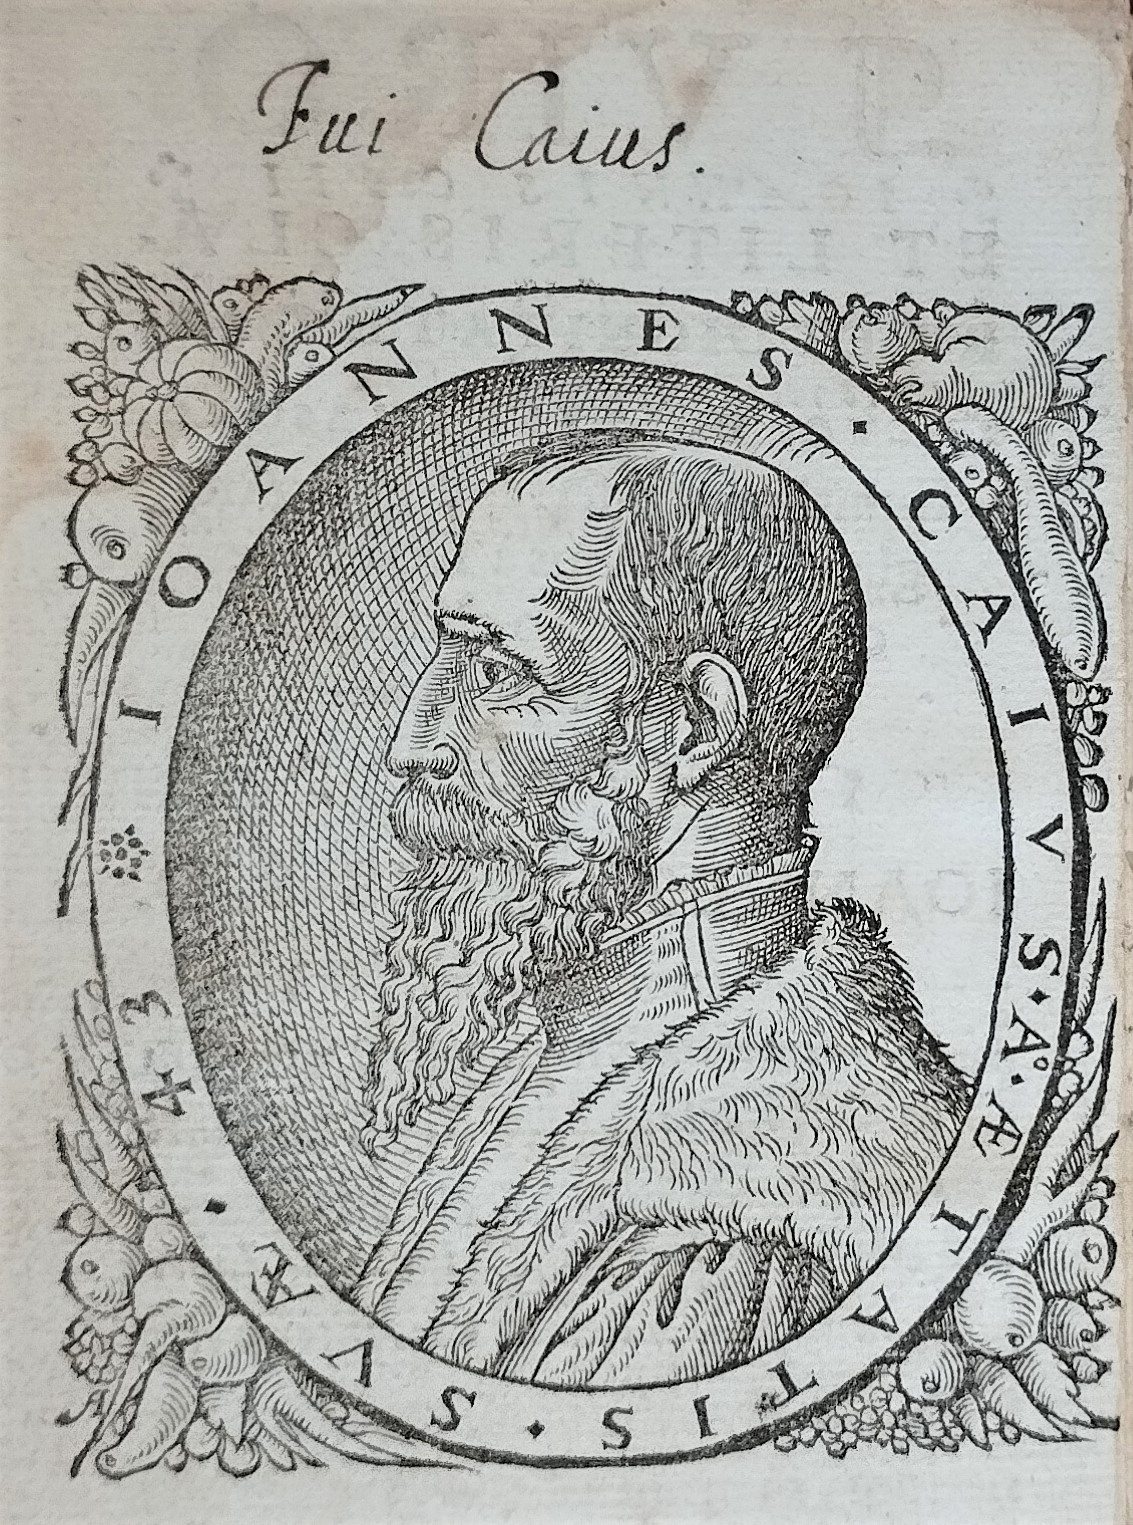 Woodcut portrait with a profile view of the head and shoulders of a middle-aged man in early modern dress, with the printed text 'Ioannes Caius a aetatis suae 43', and above it a handwritten note, 'Fui Caius'.